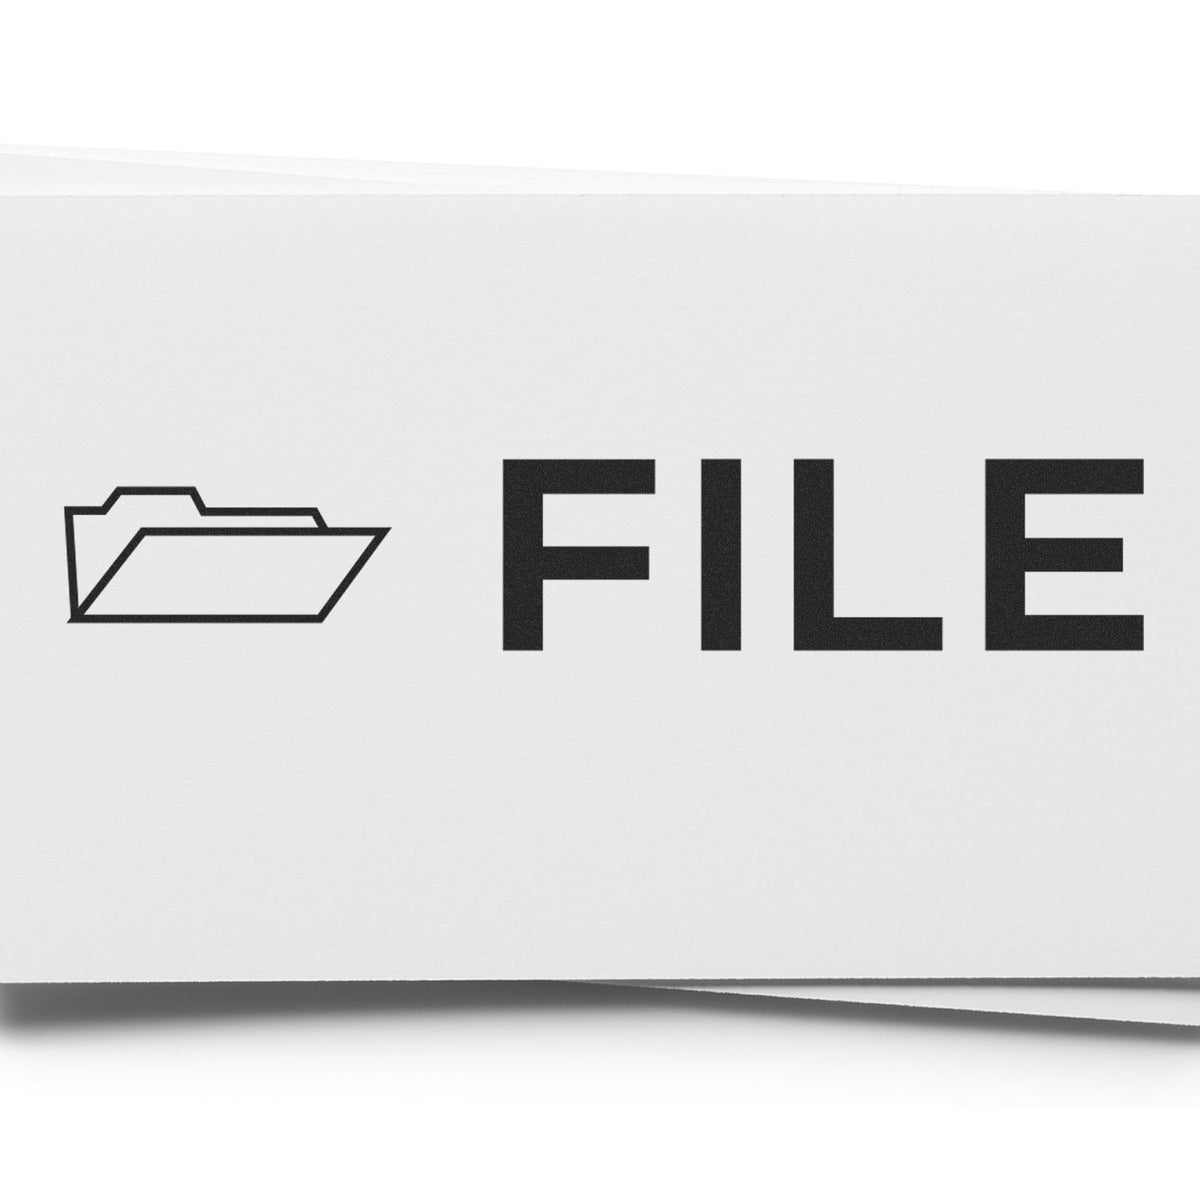 Large Self-Inking File with Envelope Stamp Lifestyle Photo